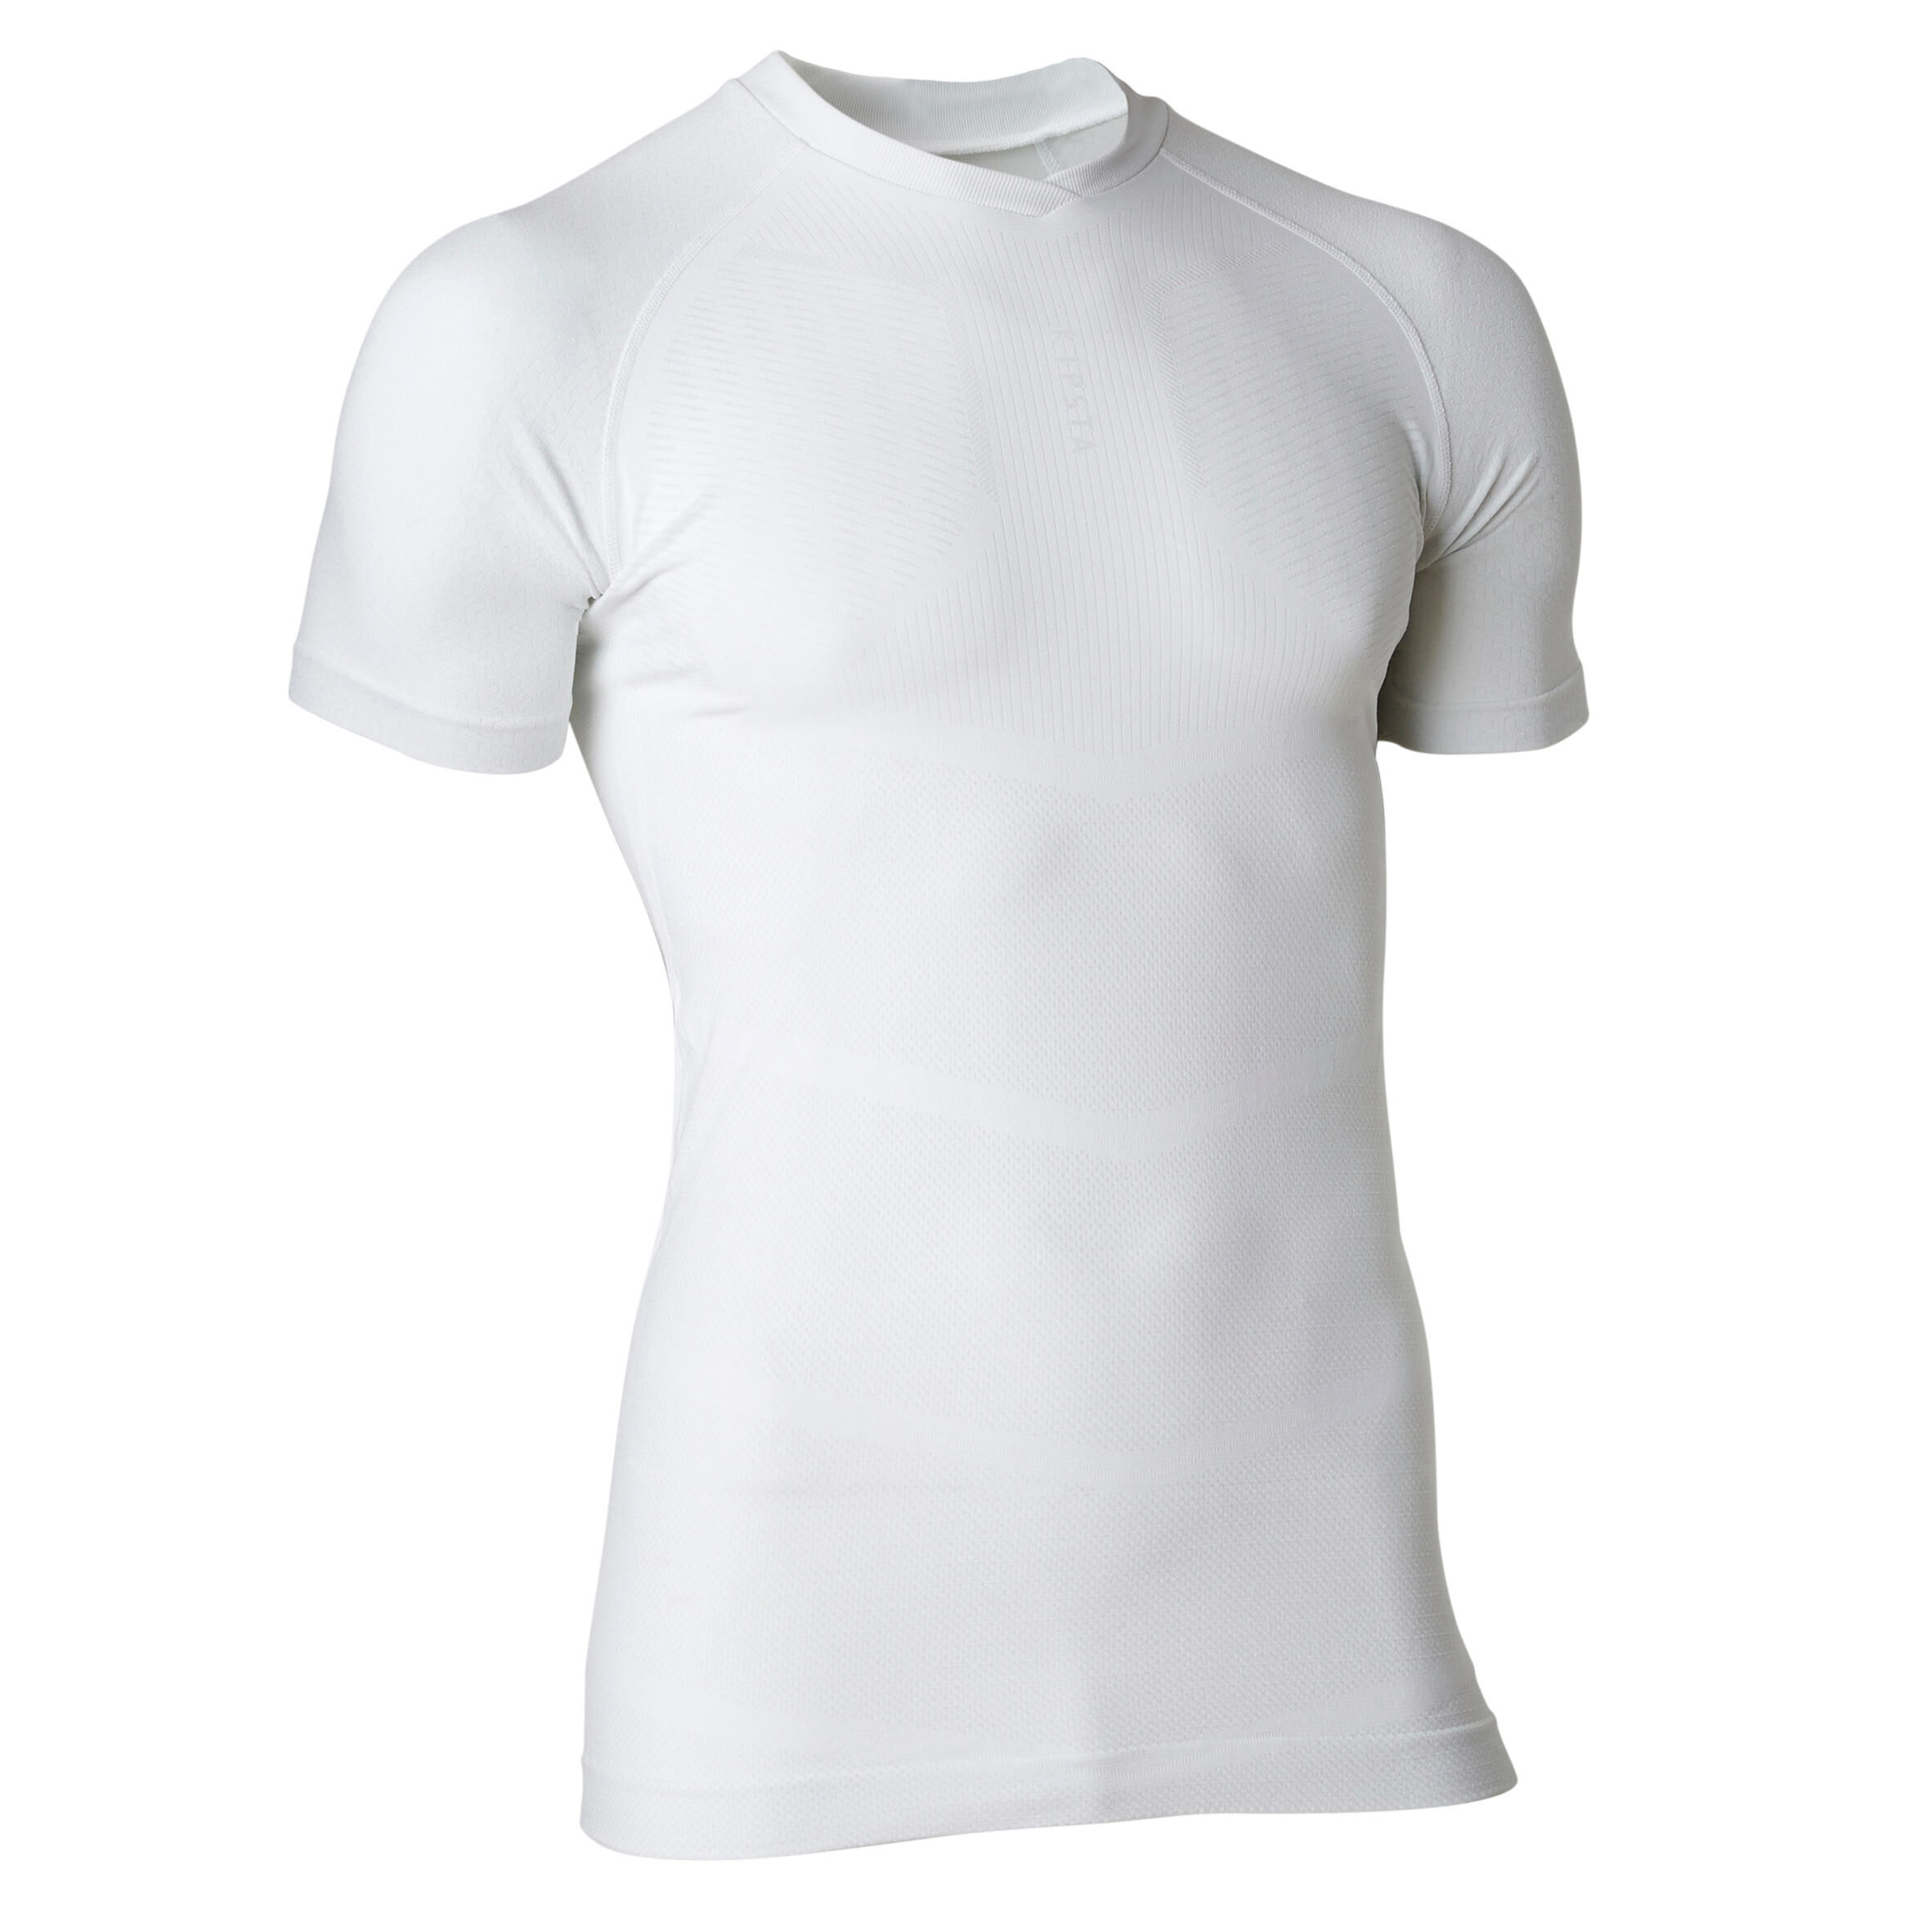 KIPSTA Adult Short-Sleeved Thermal Base Layer Top Keepdry 500 - White